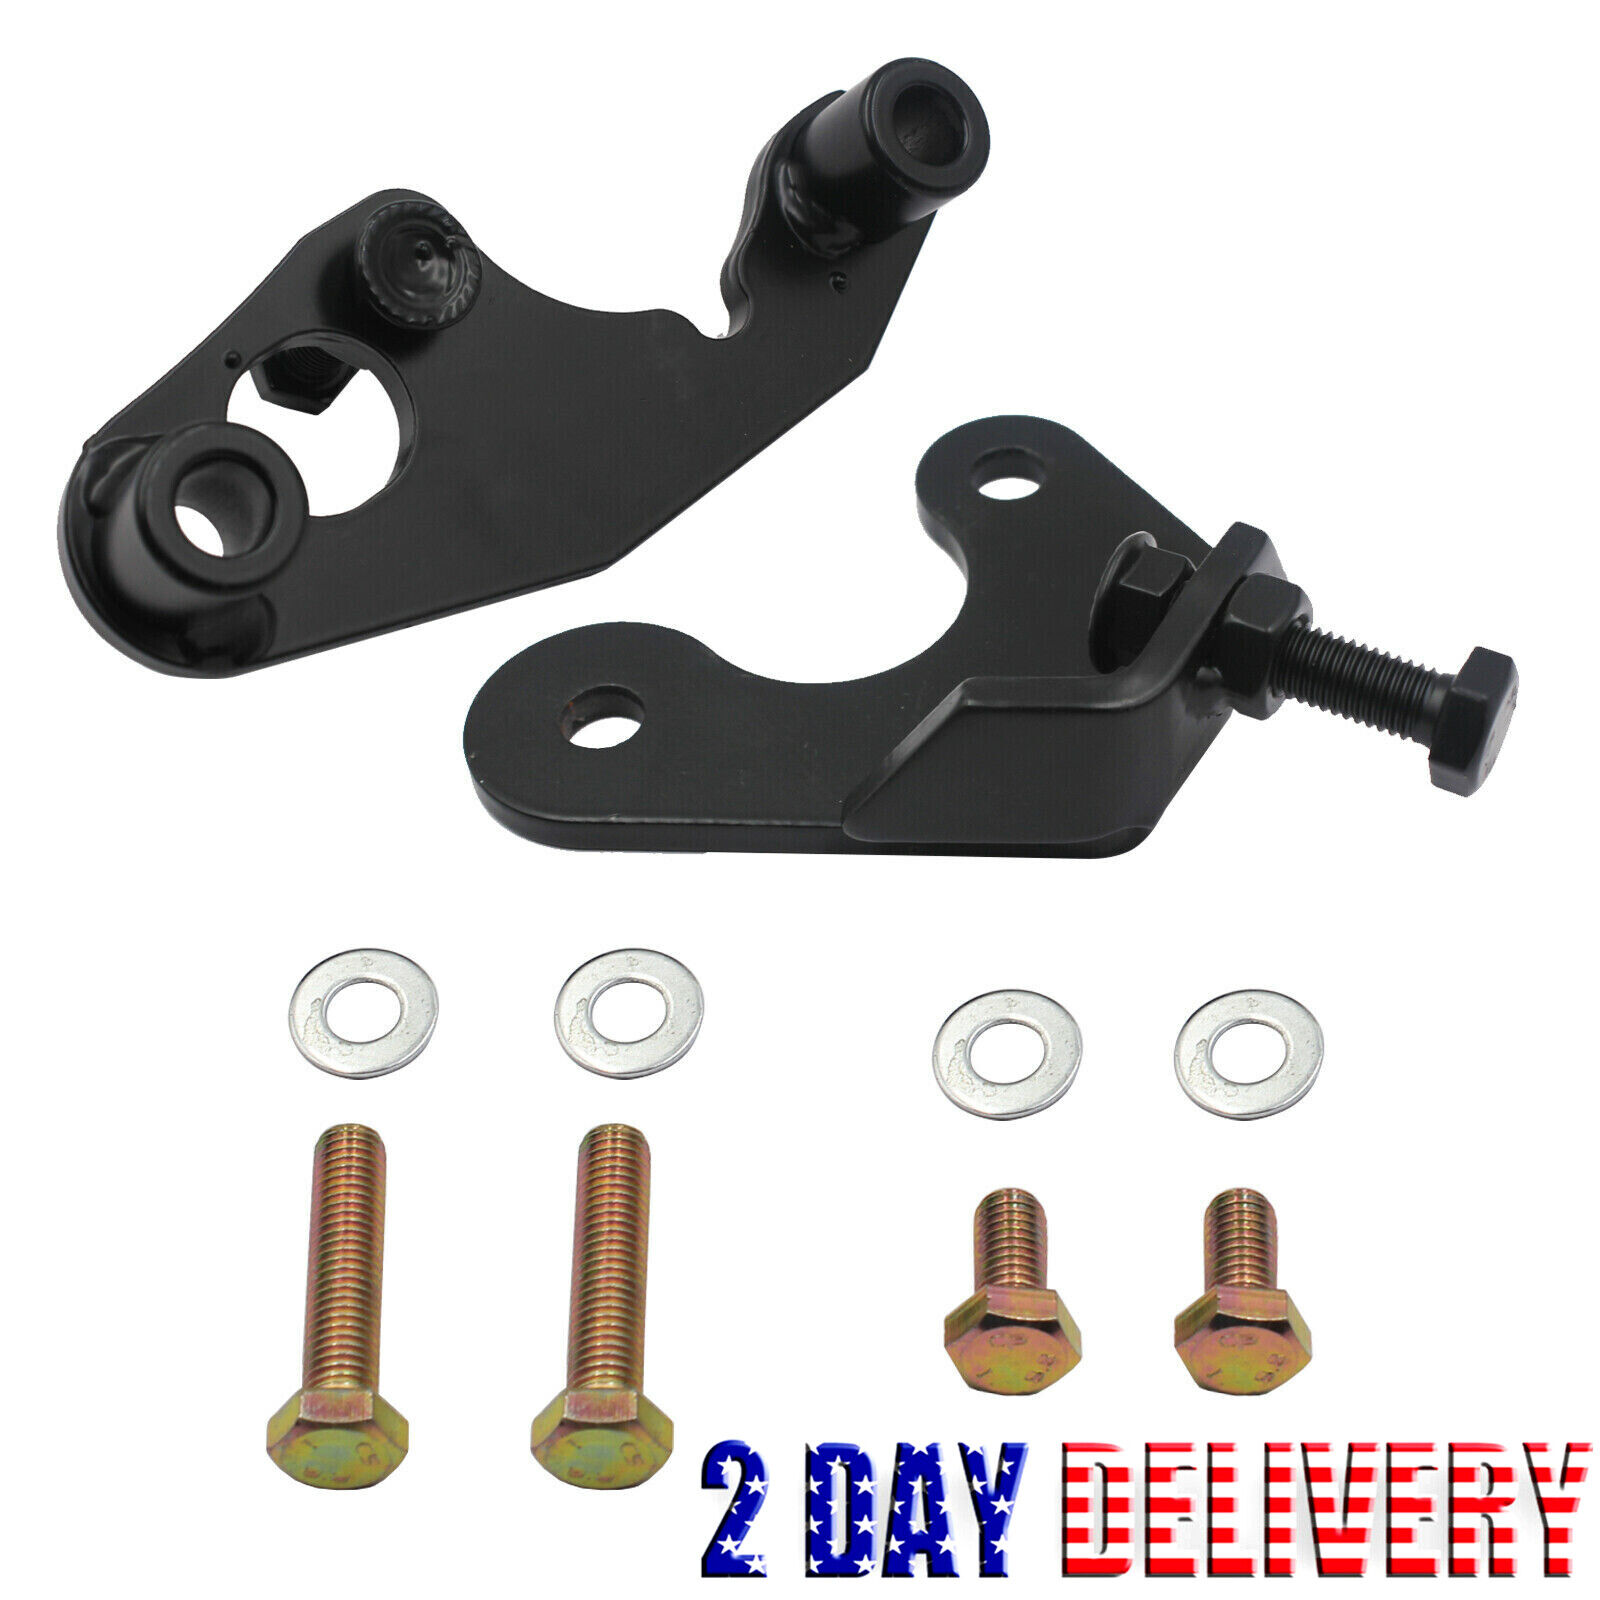 For Driver's Front /Rear Passenger Front/Rear Exhaust Manifold Bolt Repair Kit 